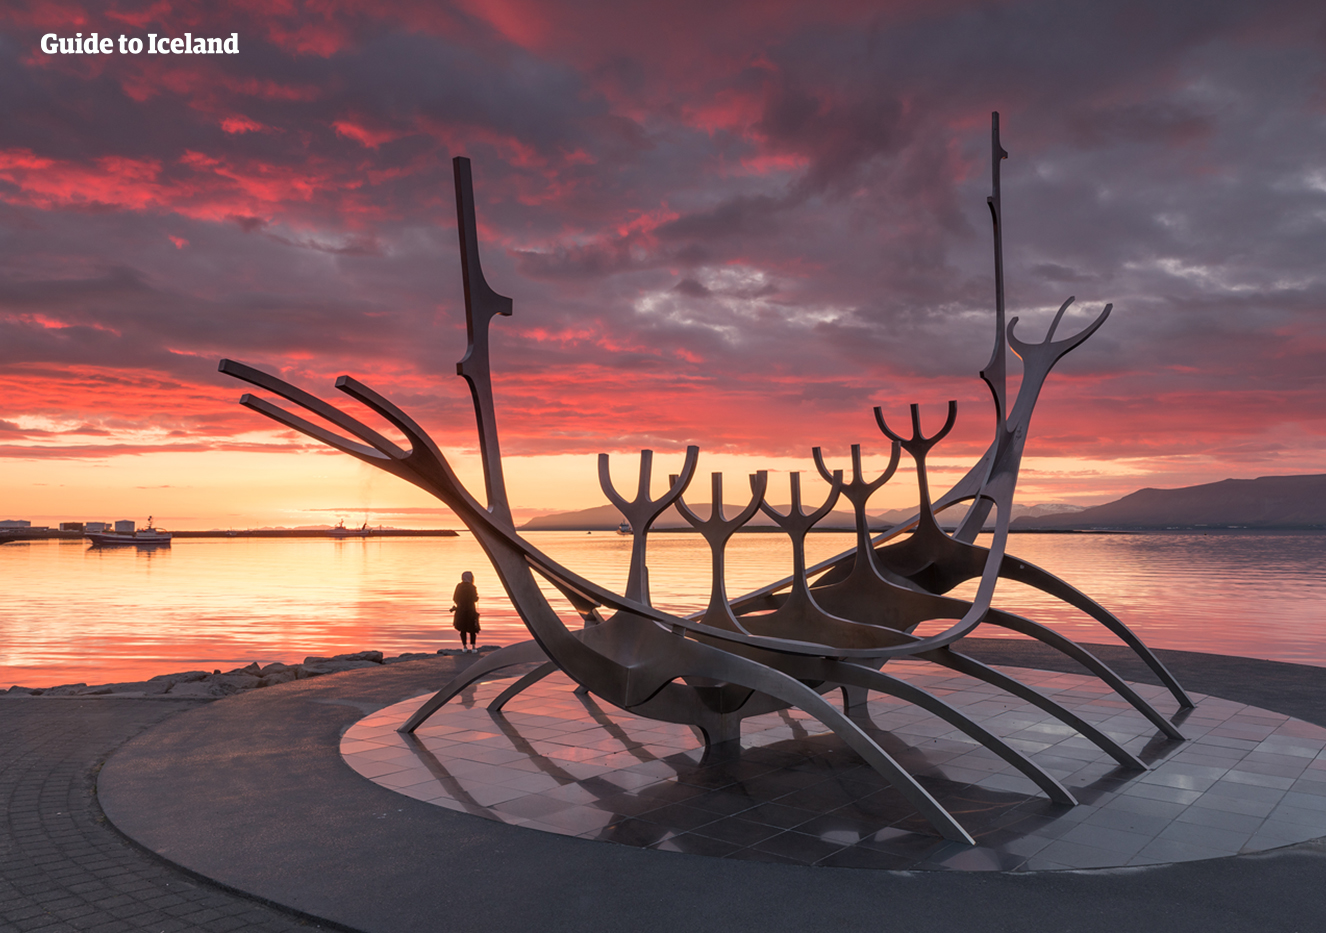 The Sun Voyager in Reykjavík sits before a still sea on a crisp and clear winter day.